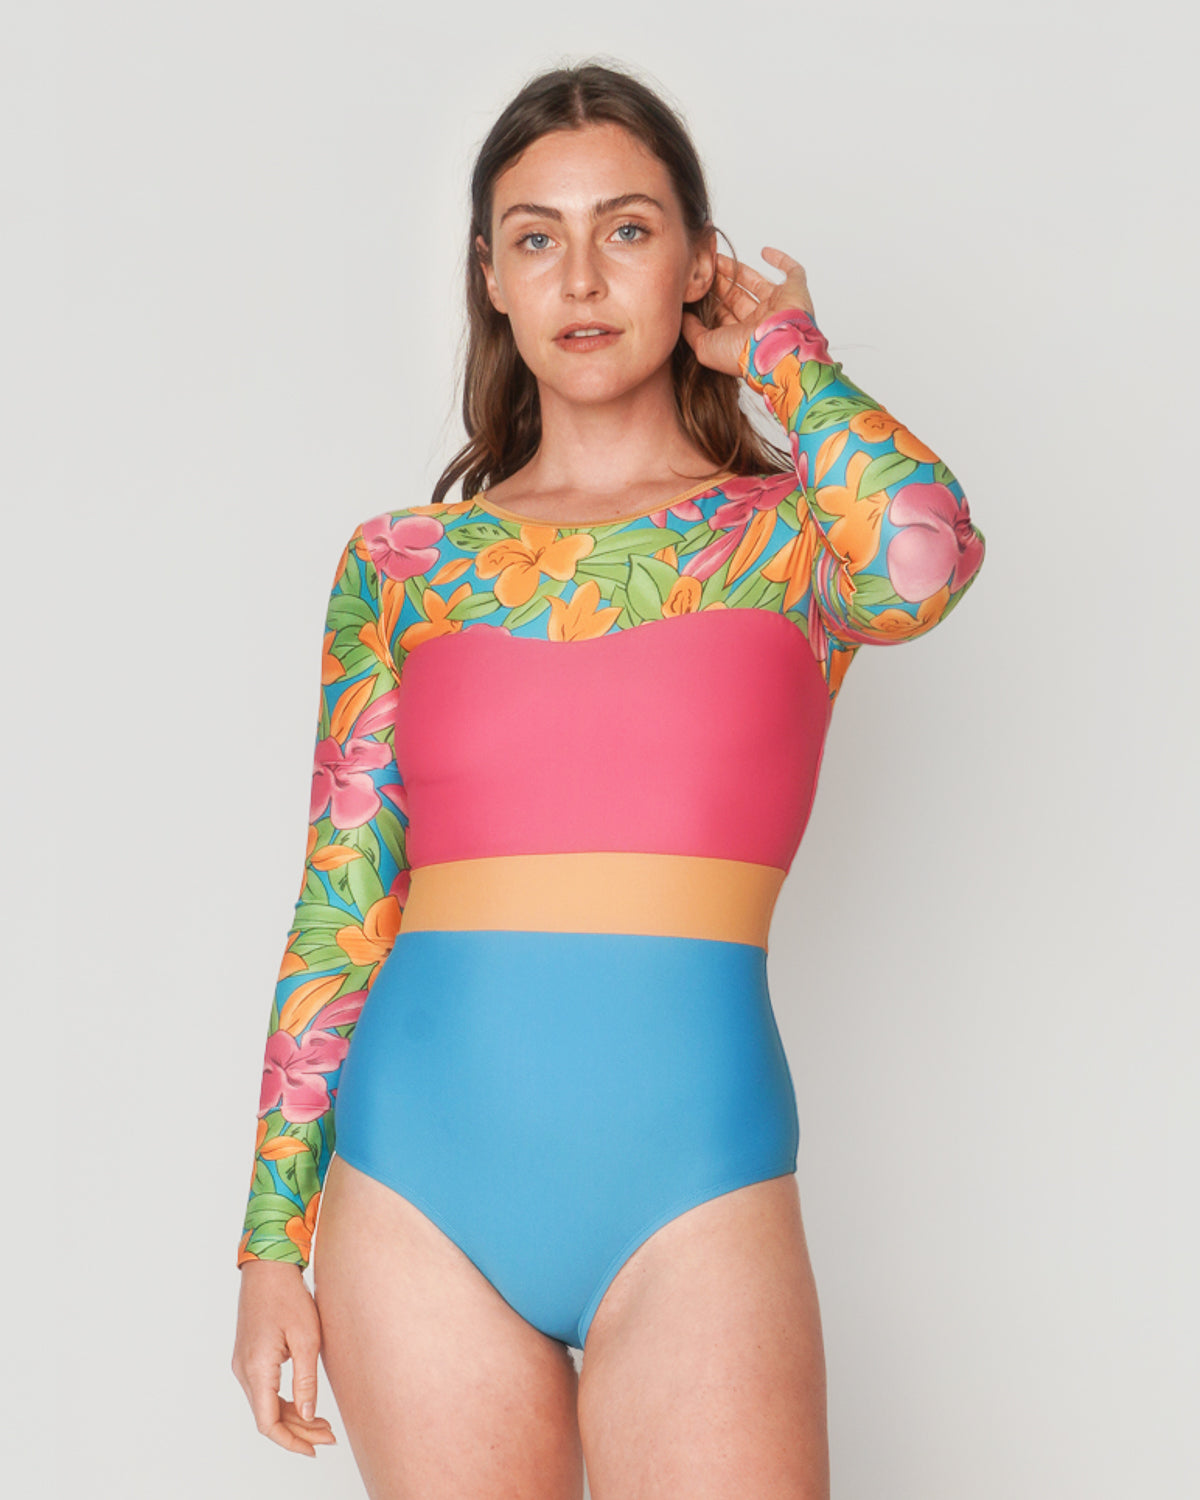 Women's Surf Suits & Long Sleeve Swimsuits   Seea Sustainable